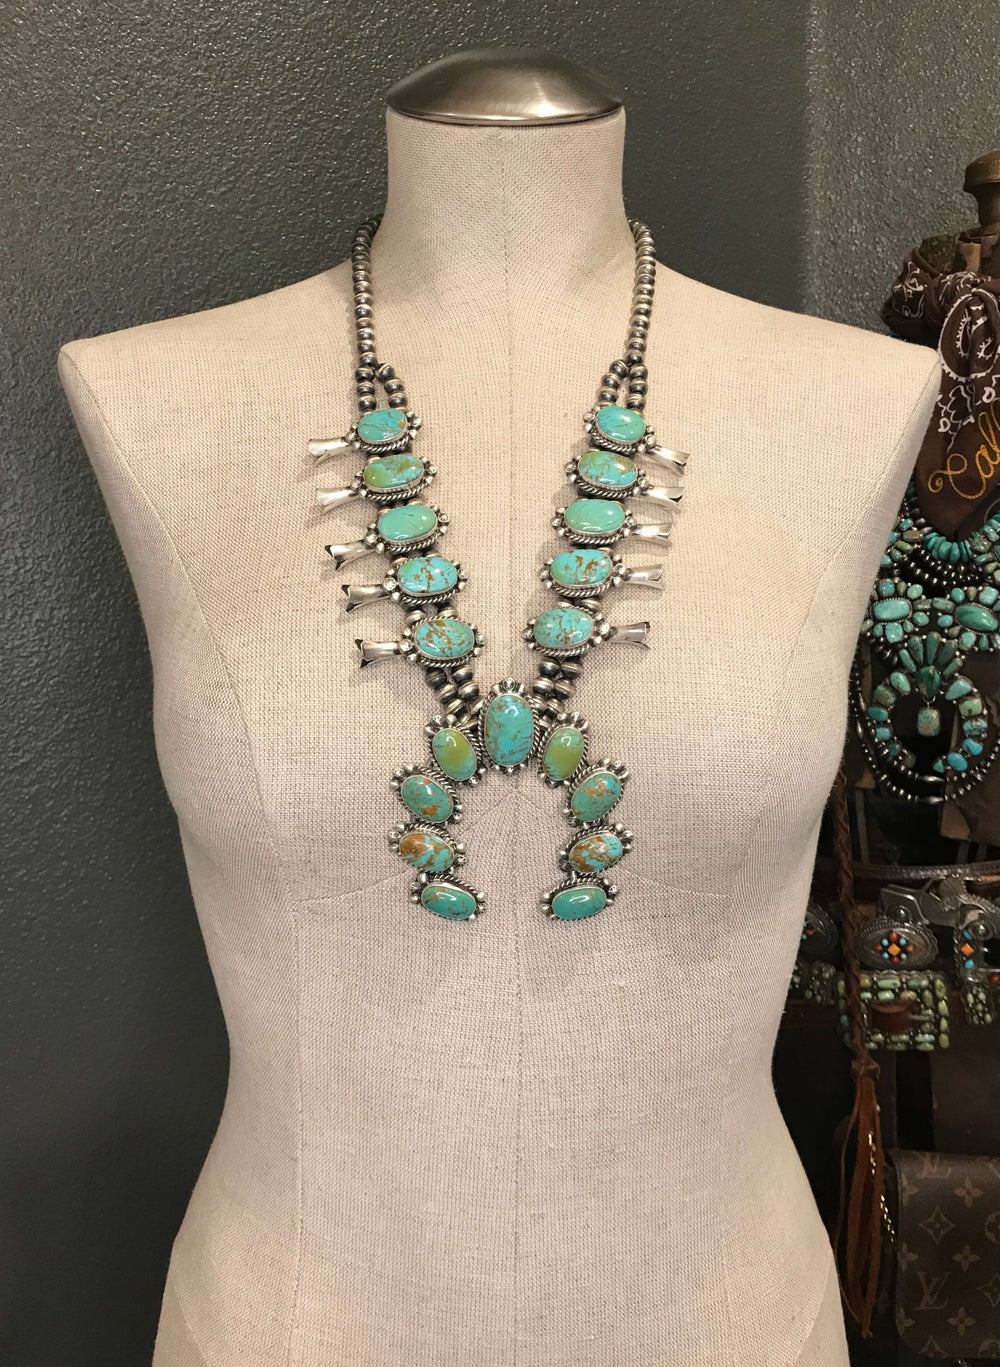 The Sutton Squash Blossom Necklace Set-Necklaces-Calli Co., Turquoise and Silver Jewelry, Native American Handmade, Zuni Tribe, Navajo Tribe, Brock Texas